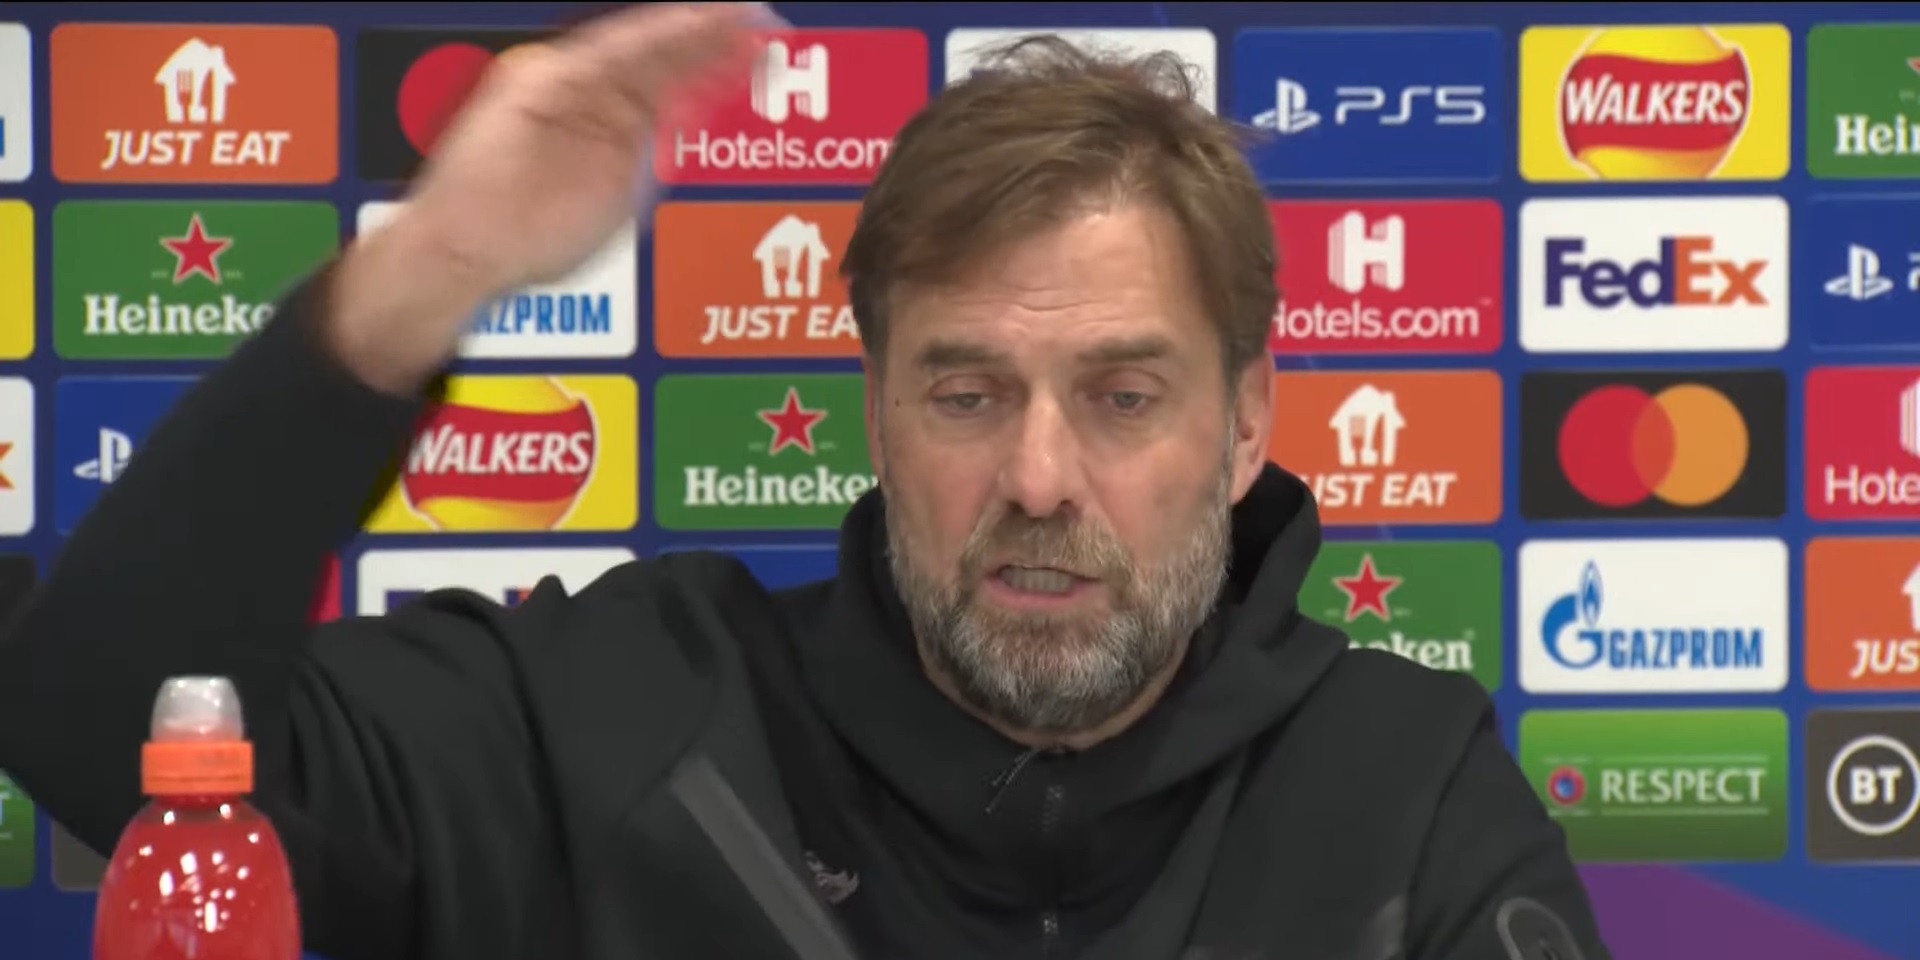 (Video) Irritated Klopp tears into reporter over unfair question: ‘I would have preferred to answer the Portuguese question’